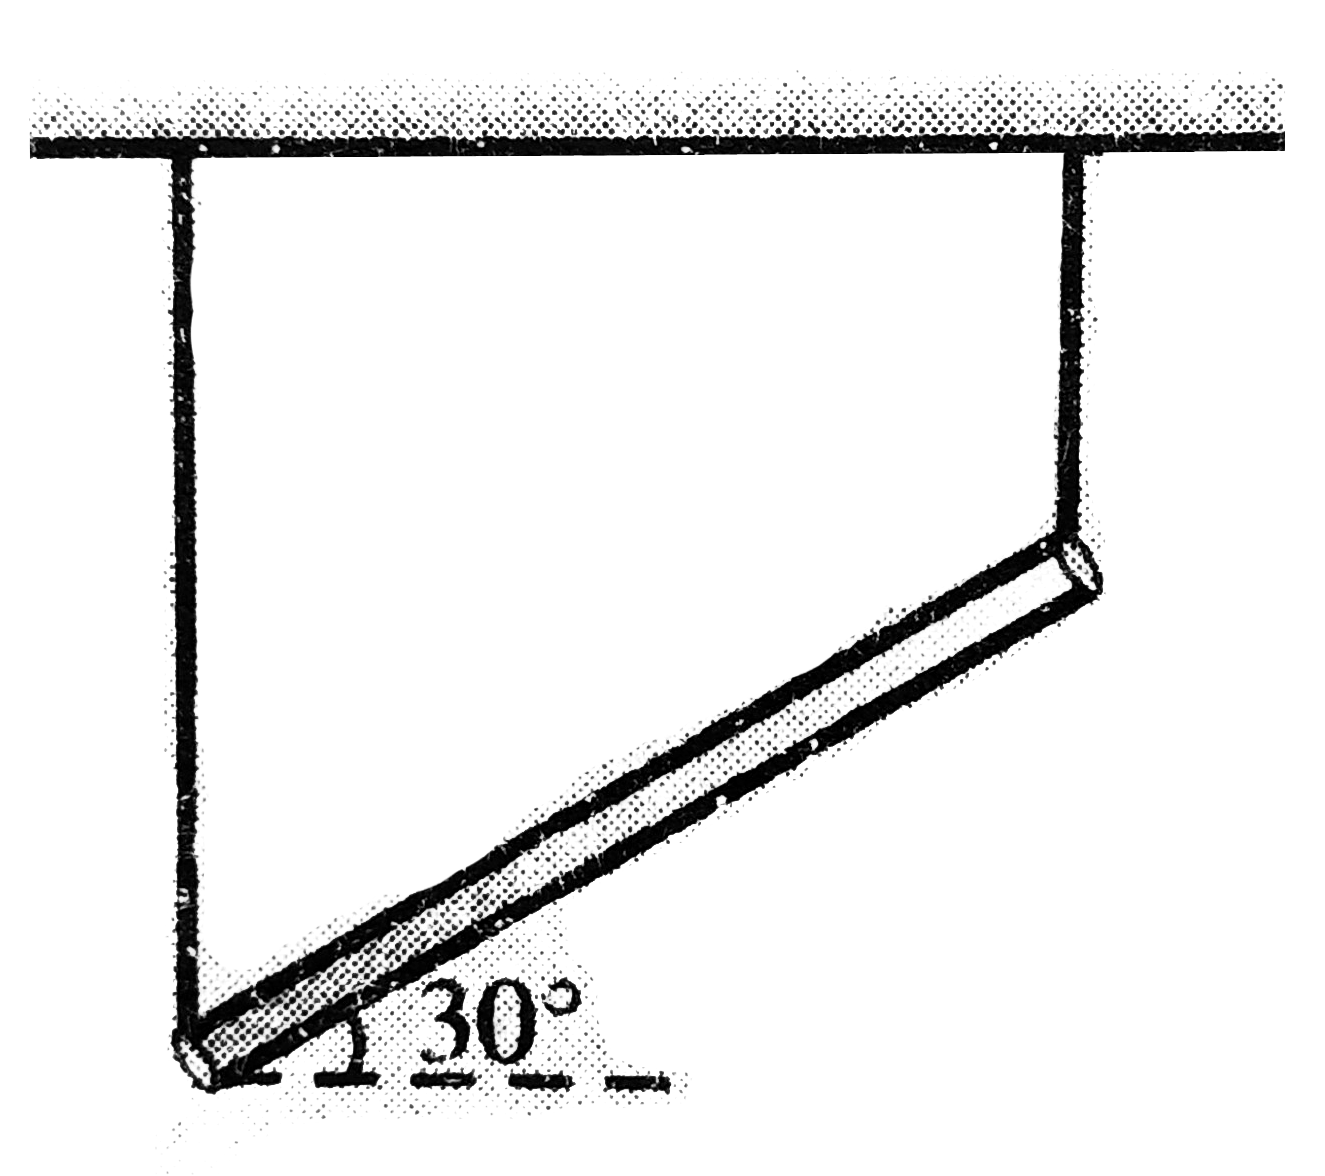 A thin uniform bar of mass m and length 2L is held at an angle 30^@ with the horizontal by means of two vertical inextensible strings, at each end as shown in figure. If the string at the right end breaks, leaving the bar to swing, determine the tension in the string at the left end and the angular acceleration of the bar immediately after string breaks.